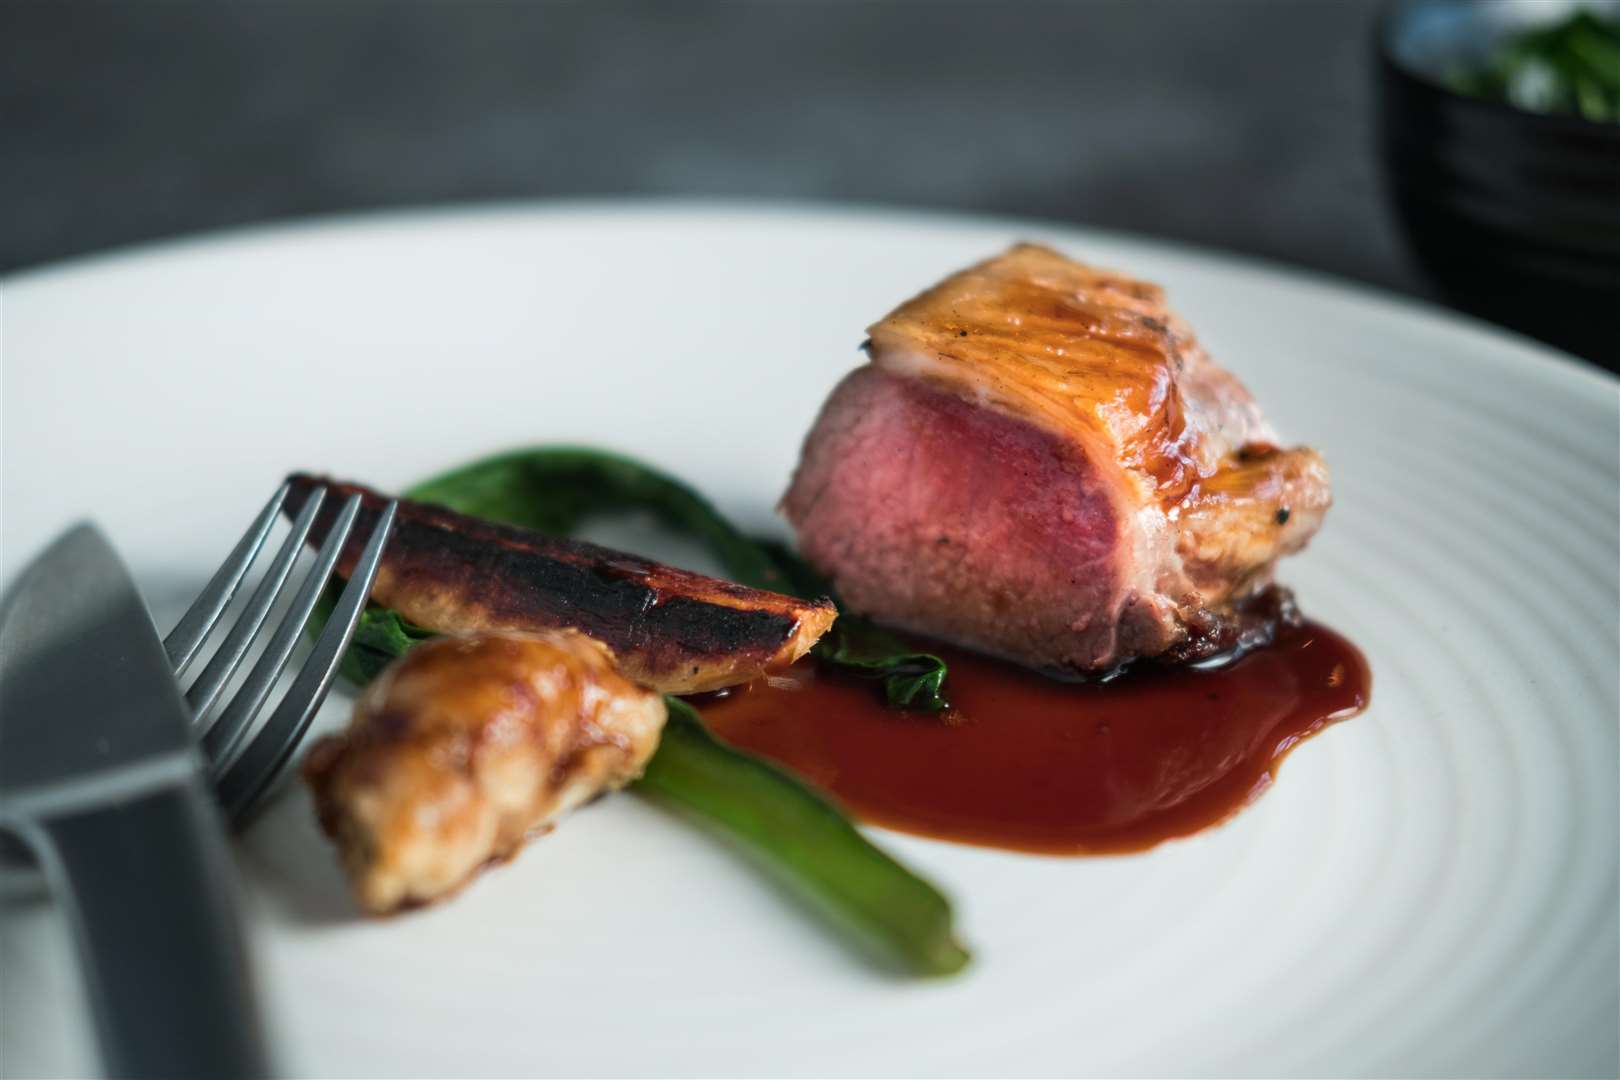 Lamb and roasted roots from the Small Holding. Picture: SWNS